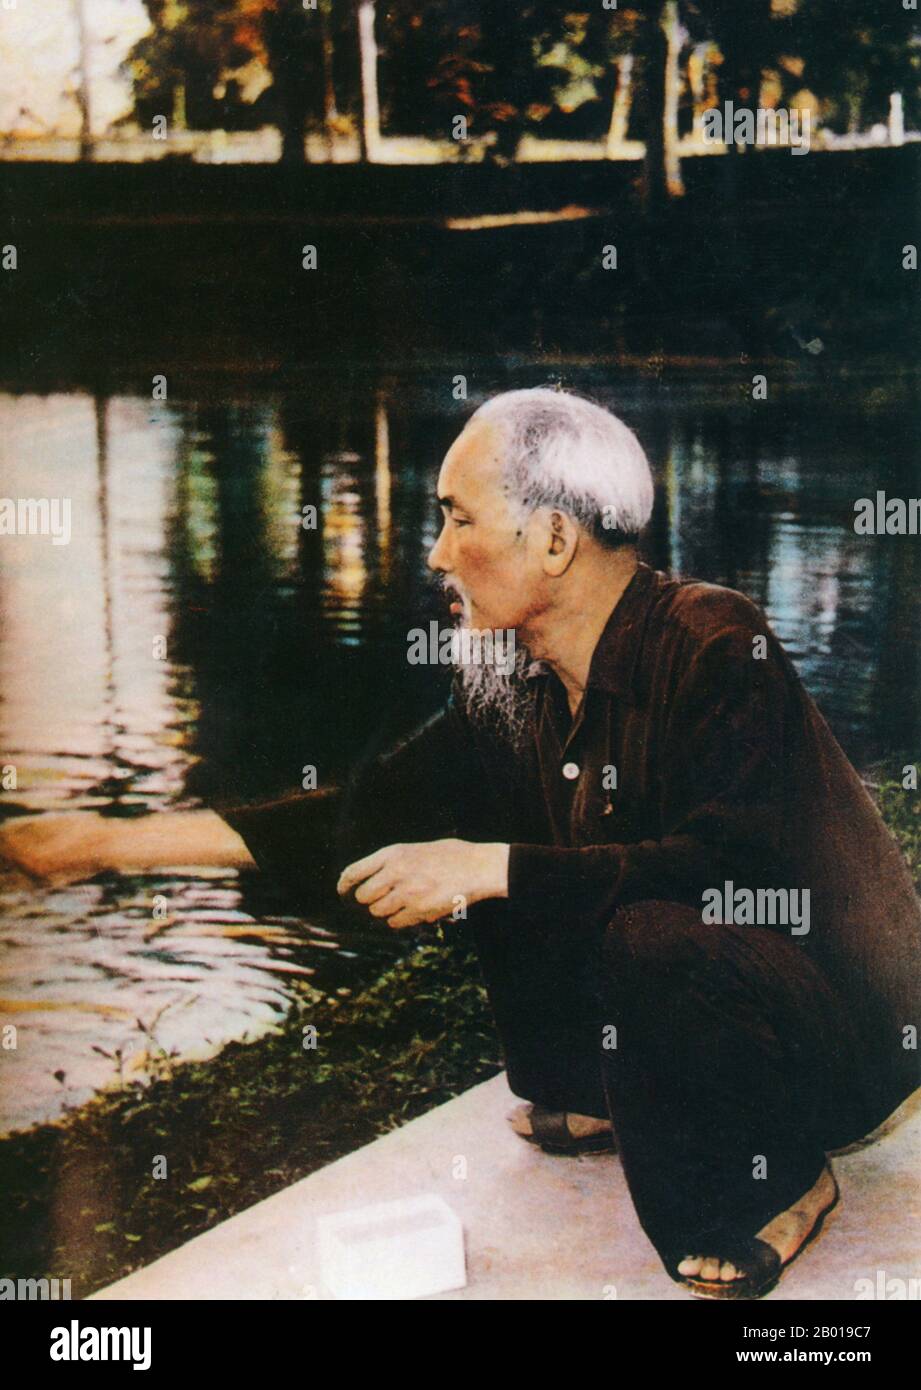 Vietnam: President Ho Chi Minh (19 May 1890 - 3 September 1969) feeding fish in the grounds of the Presidential Palace, Hanoi, c. 1960.  Hồ Chí Minh, born Nguyễn Sinh Cung and also known as Nguyễn Ái Quốc was a Vietnamese Communist revolutionary leader who was prime minister (1946-1955) and president (1945-1969) of the Democratic Republic of Vietnam (North Vietnam). He formed the Democratic Republic of Vietnam and led the Viet Cong during the Vietnam War until his death. Stock Photo